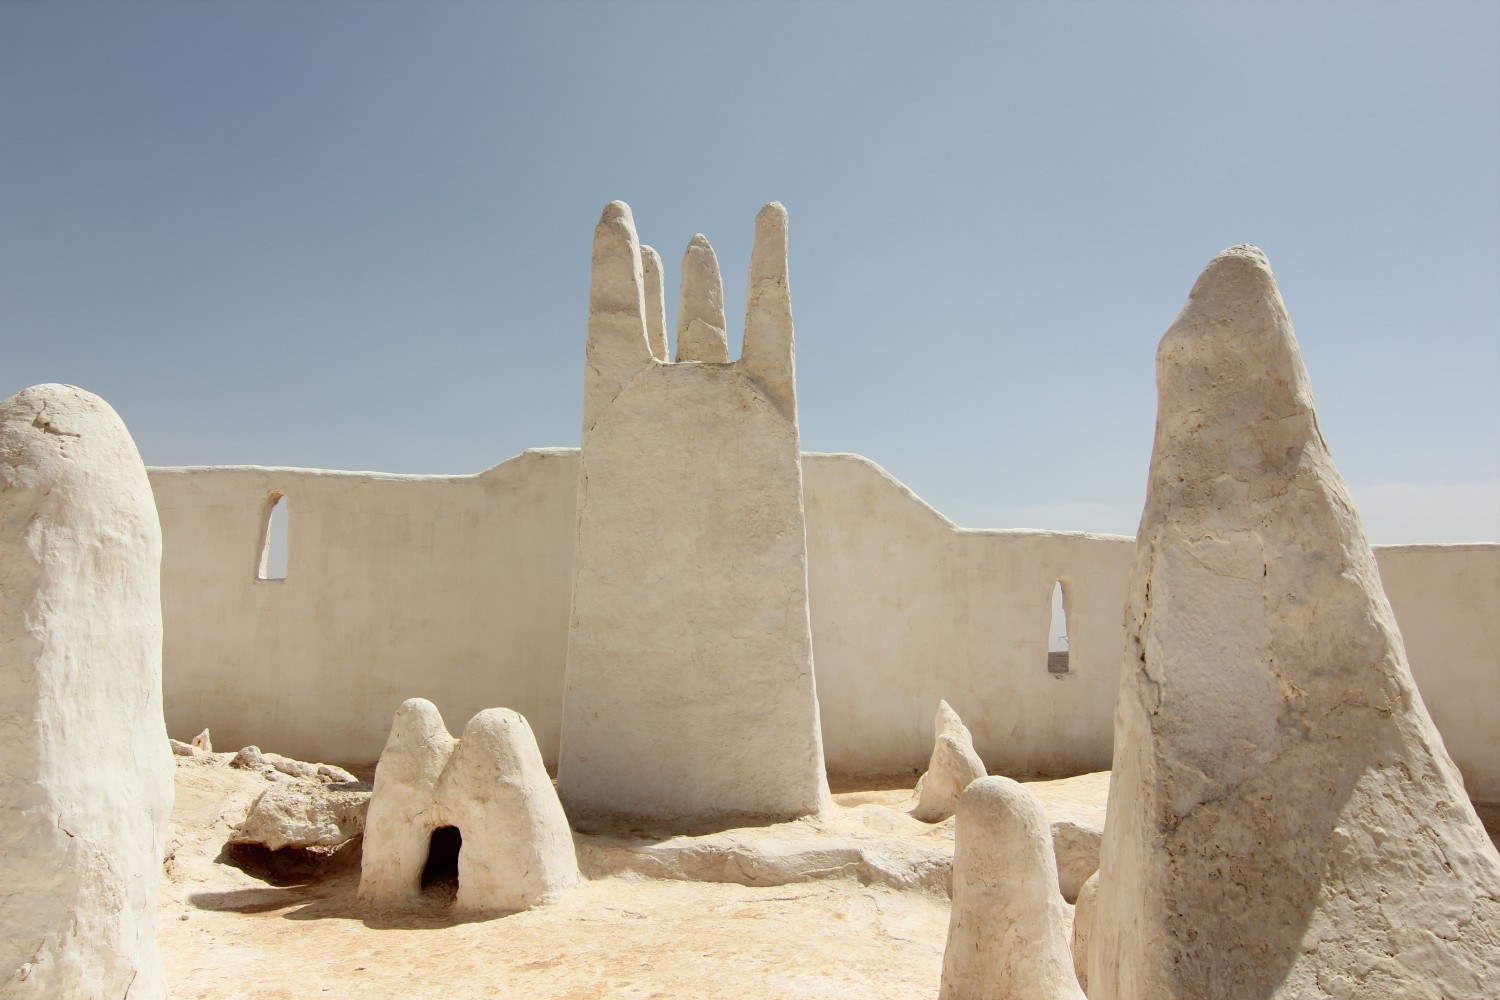 Mélika, close view of the tombs of Sidi Aïssa, with white lime gravestone